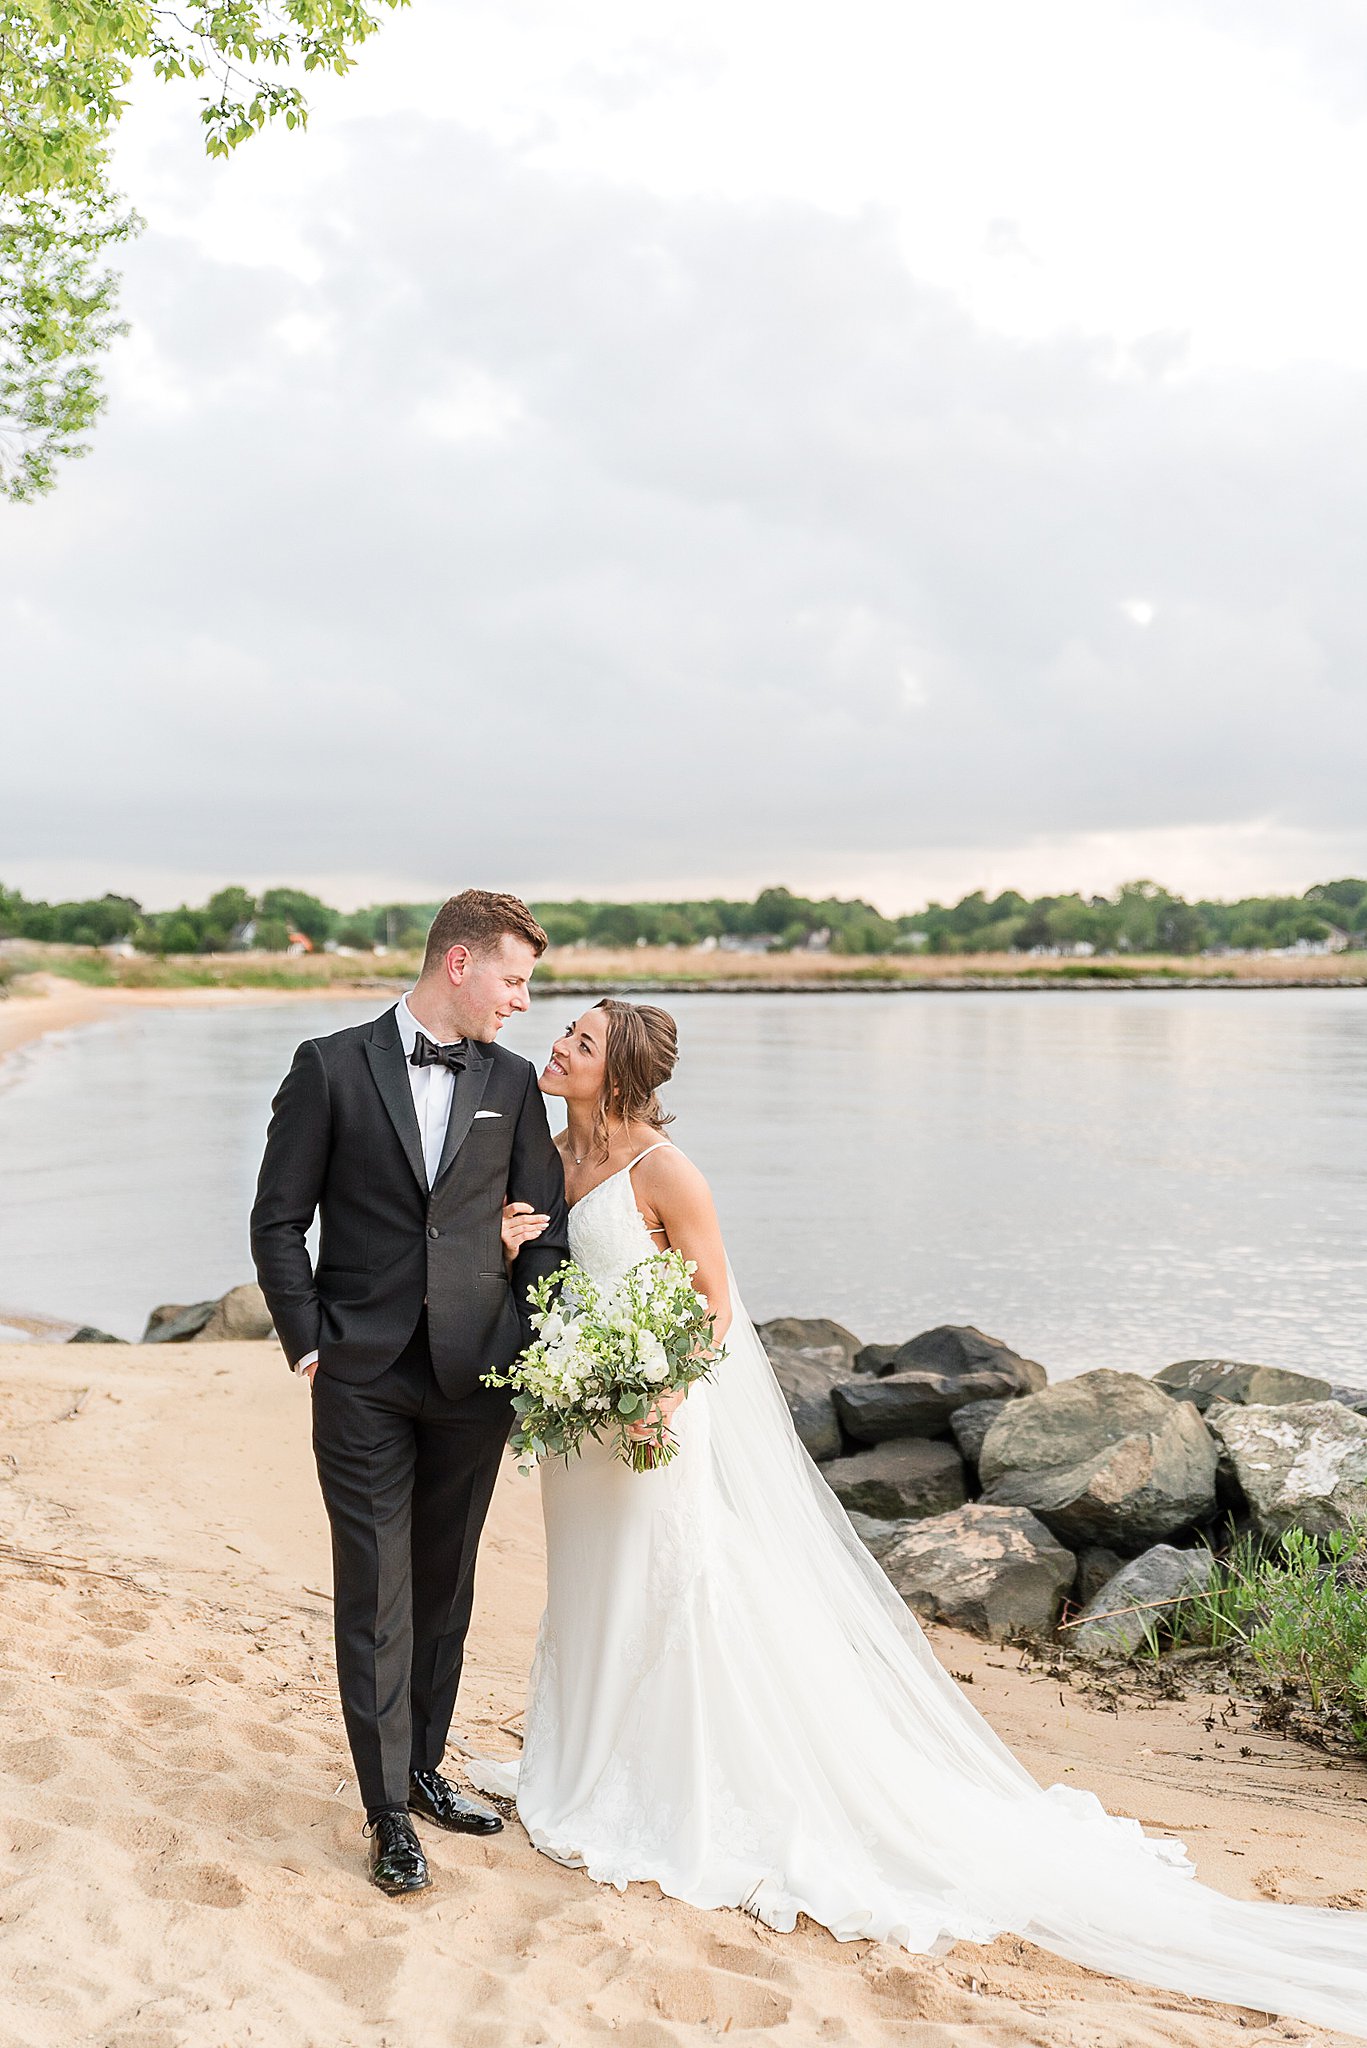 A bride hangs on the arm of her groom while walking on a sandy beach at one of the incredible Baltimore Waterfront Wedding Venues